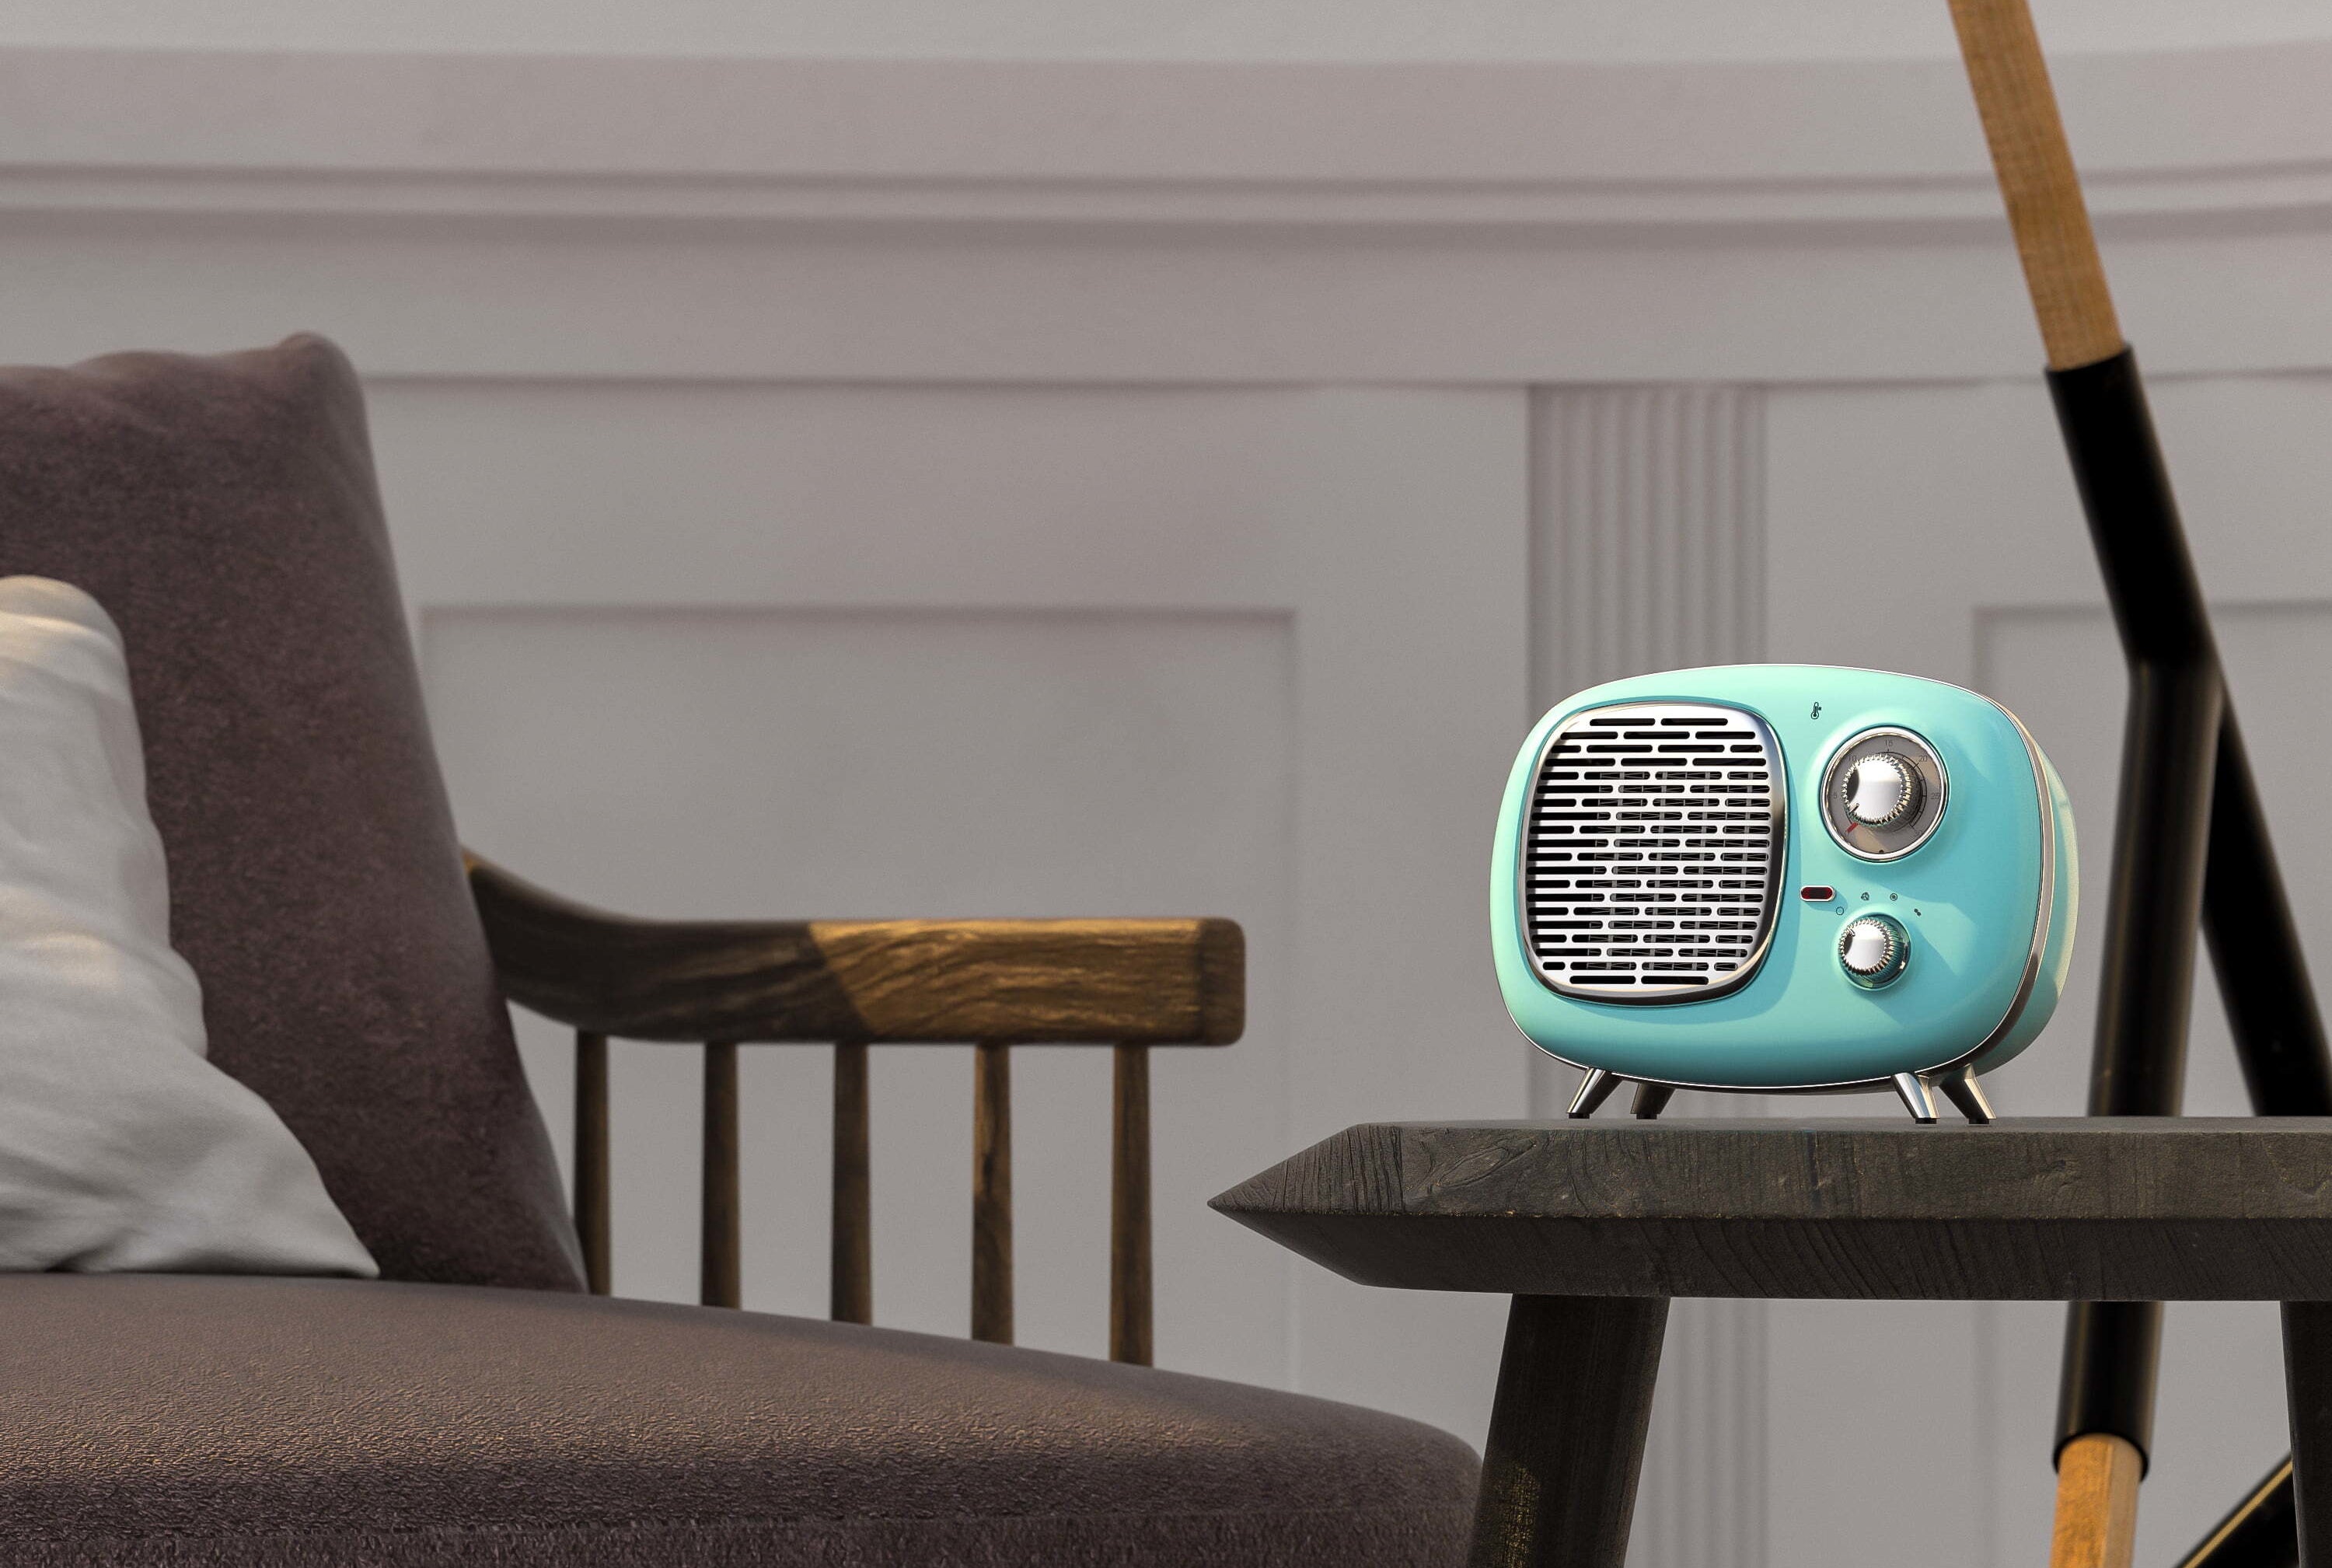 The heater, which resembles a retro radio, with a rounded body, metallic knobs and grill, and four legs, in mint green